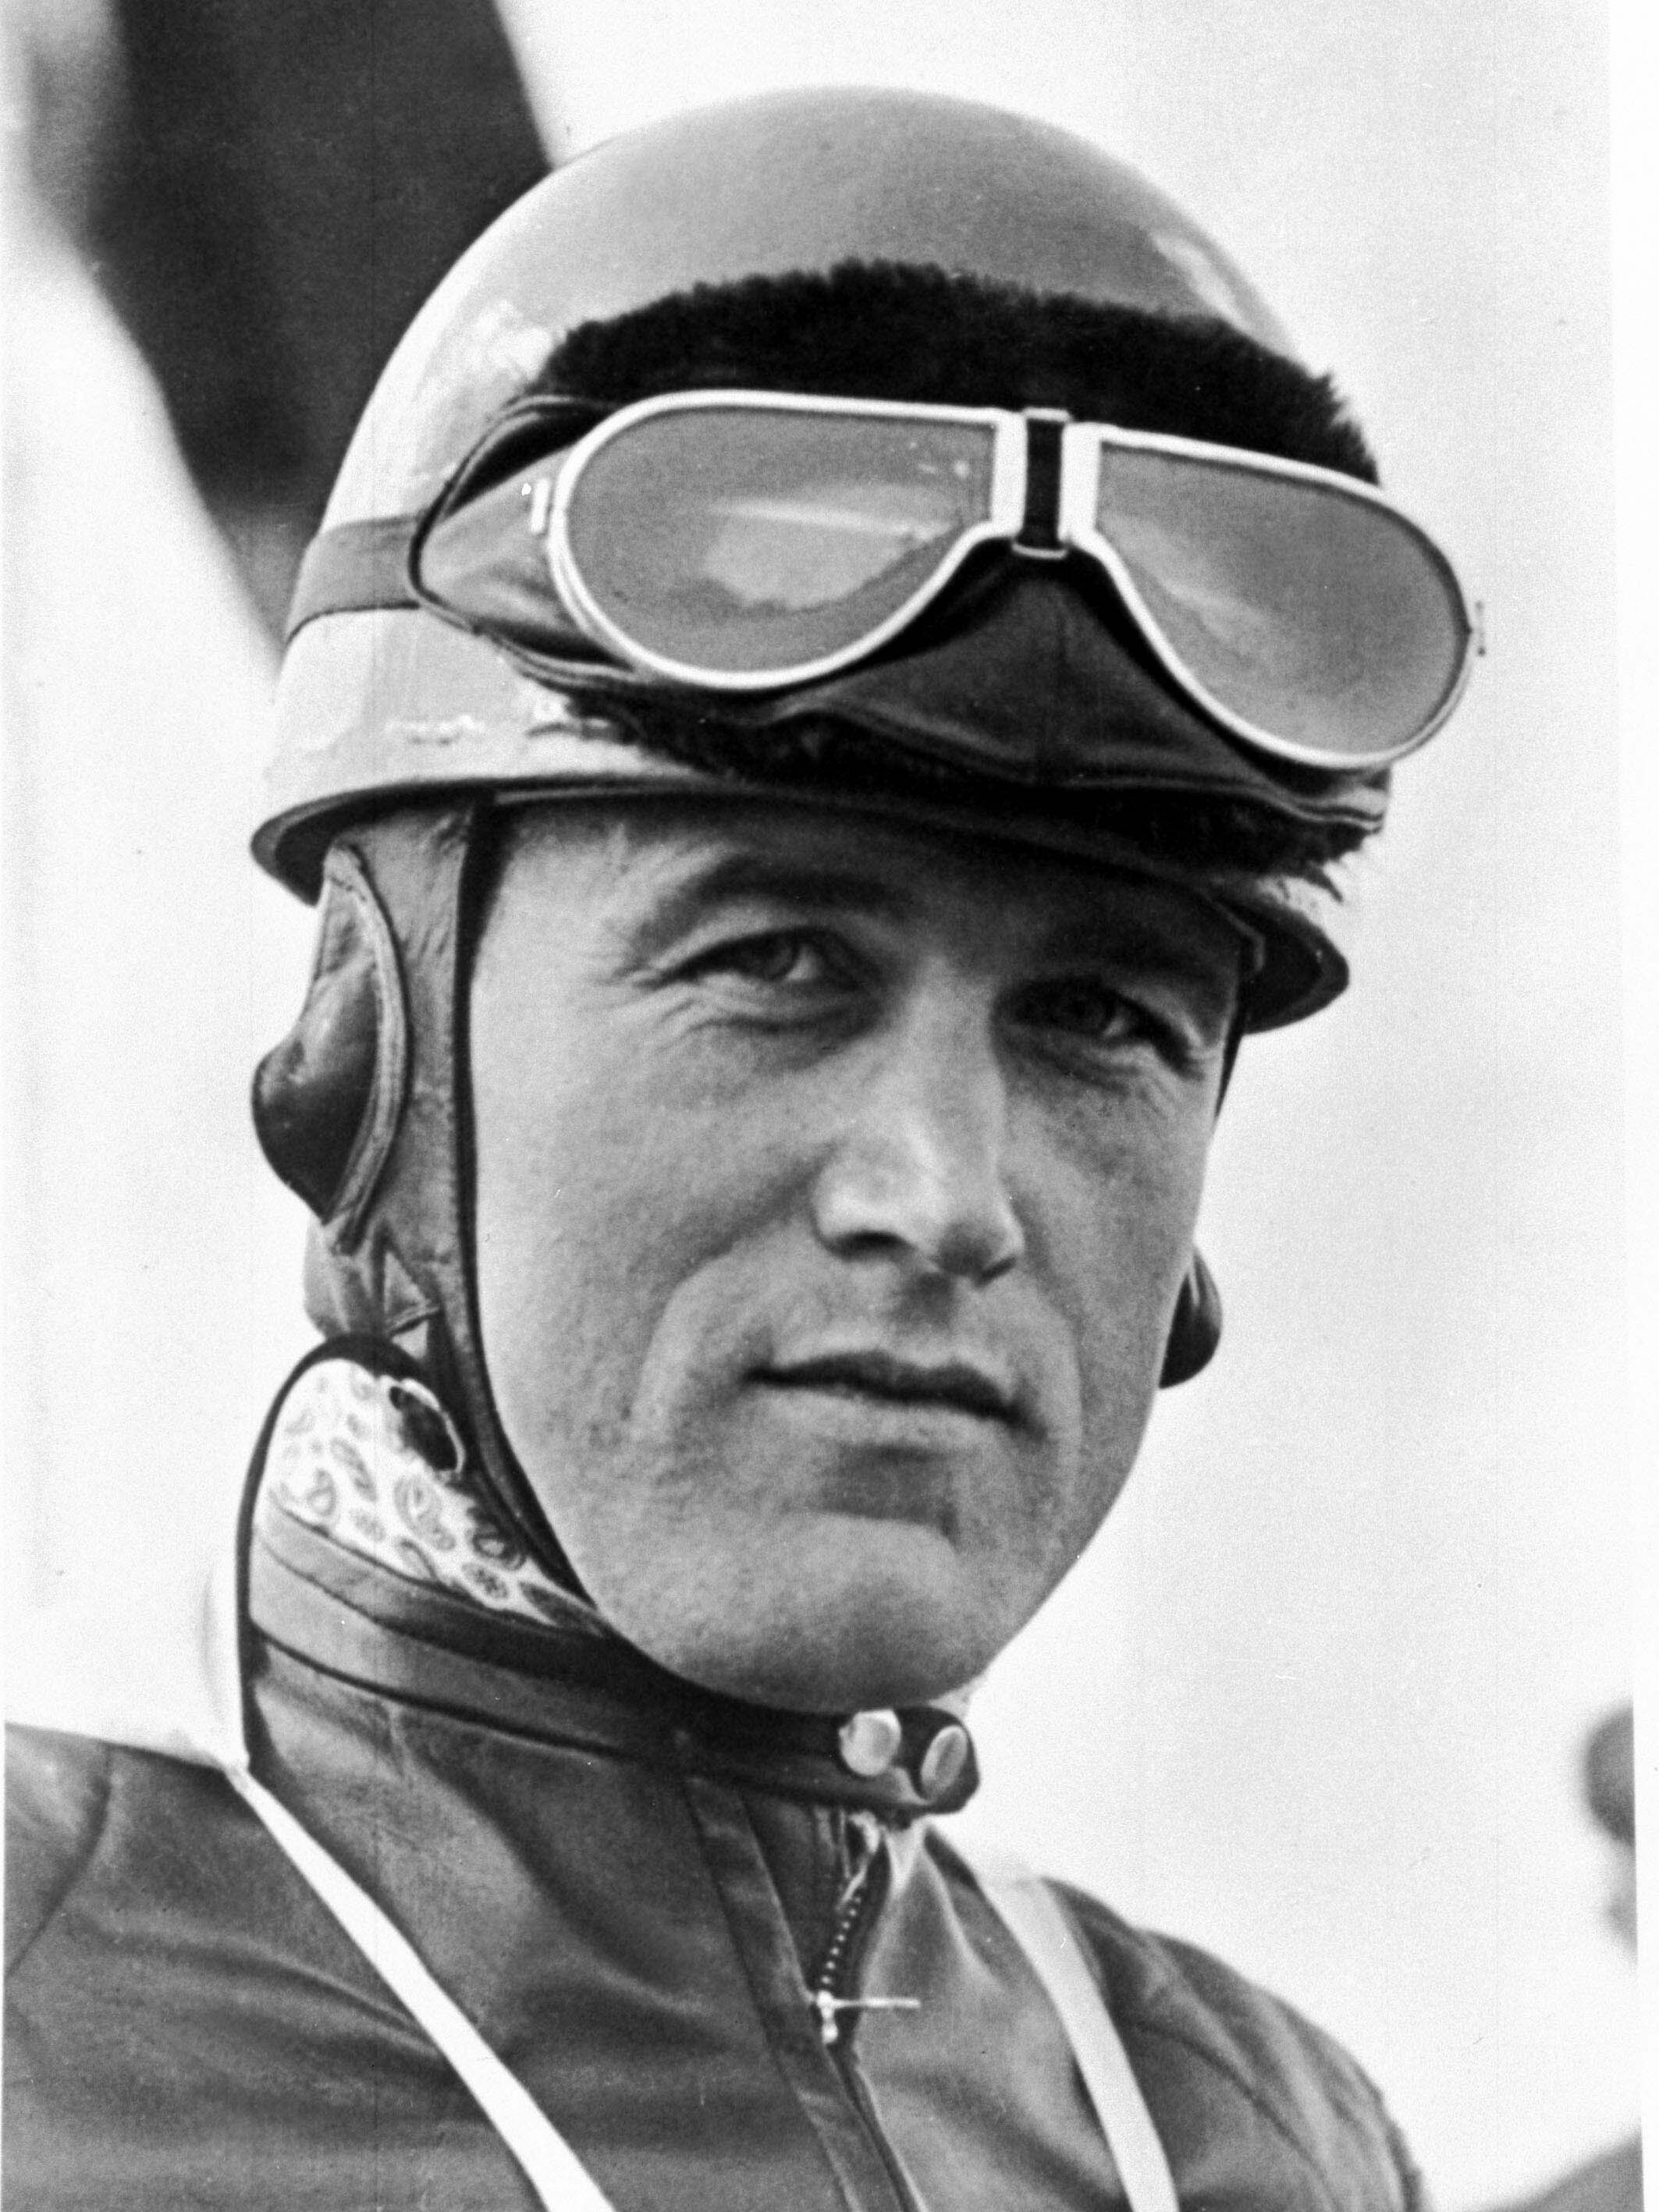 Ewald Kluge (1909 - 1964), DKW works rider, became European champion, German champion, German hillclimb champion and Isle of Man TT winner during the 1938 season and was honoured with the rare "Master of Masters" title. At the end of the nineteen-thirties, he was the brightest star on the German motorcycle racing scene